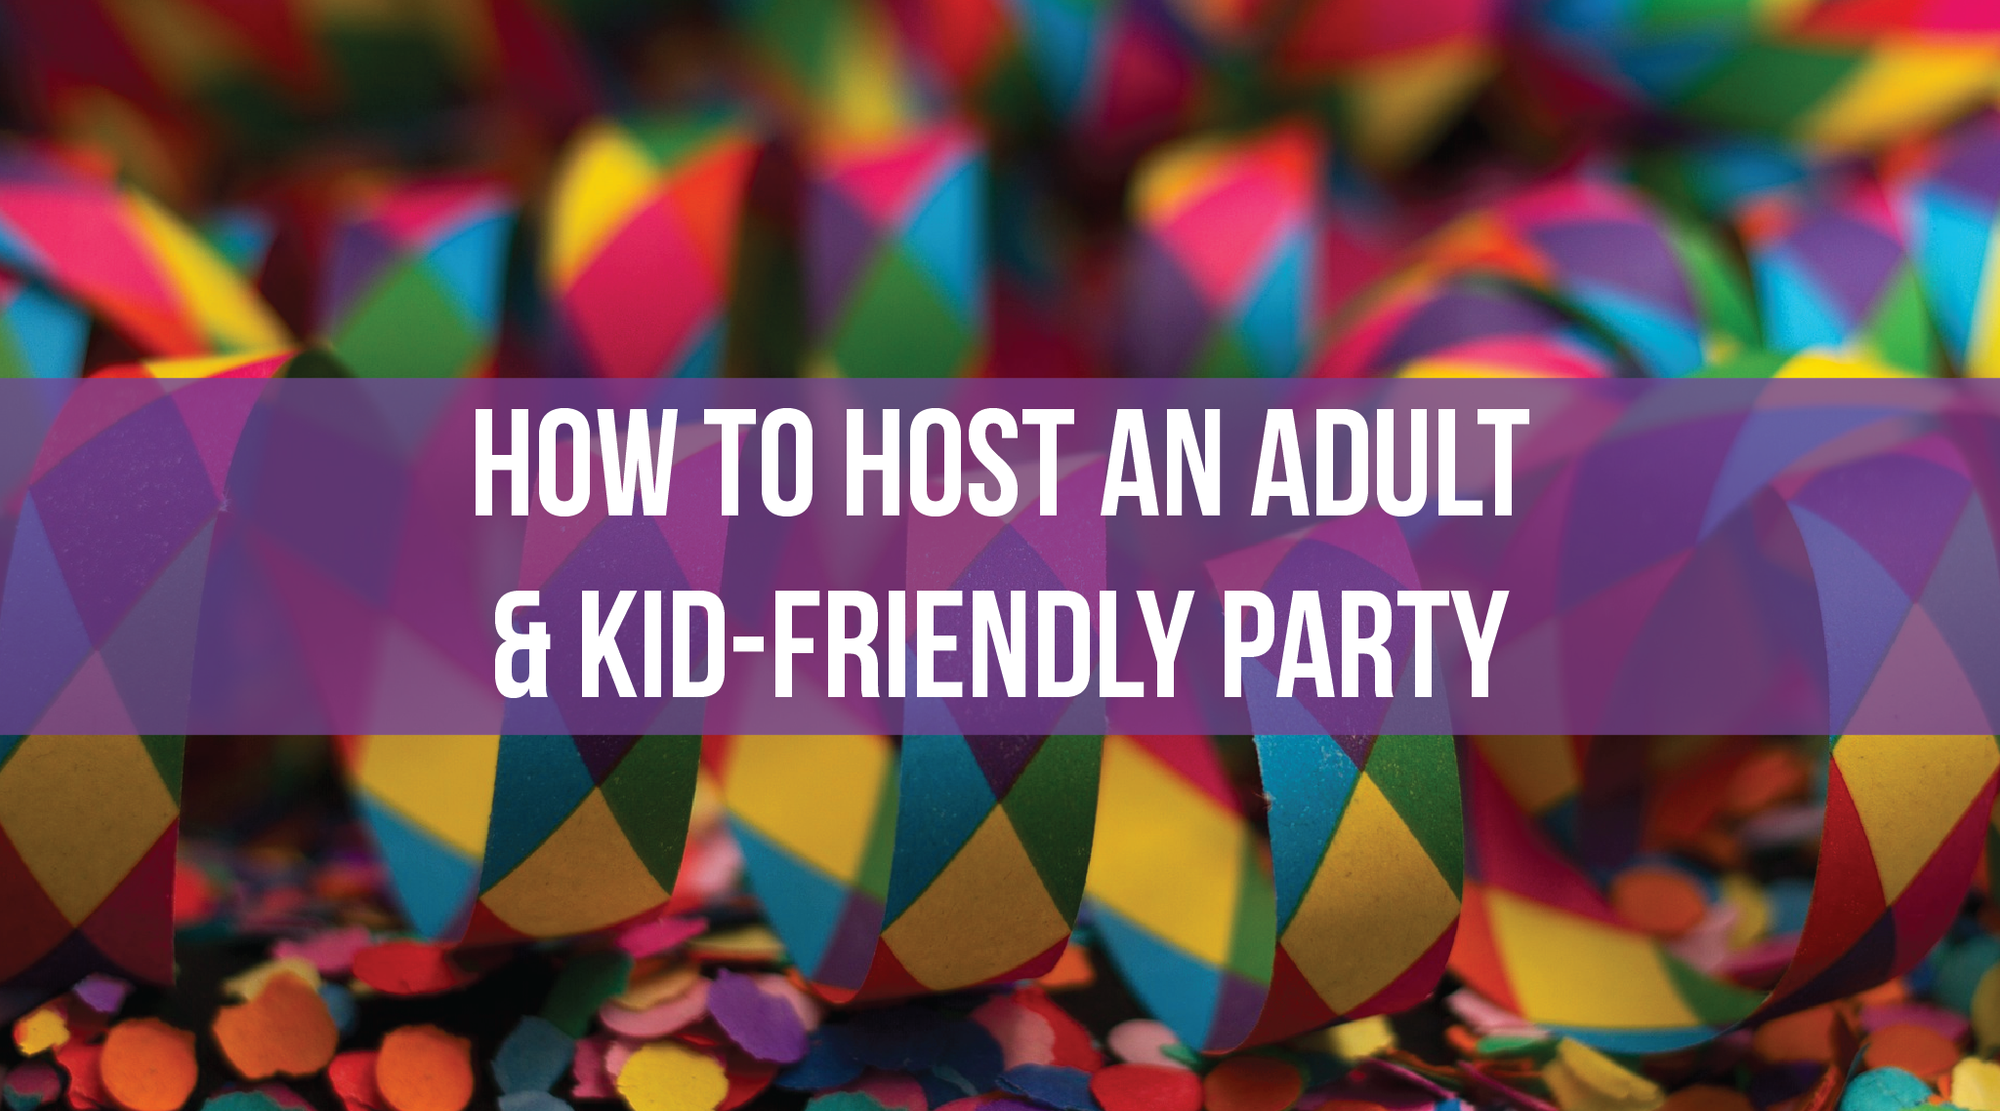 How to Host an Adult & Kid-Friendly Party